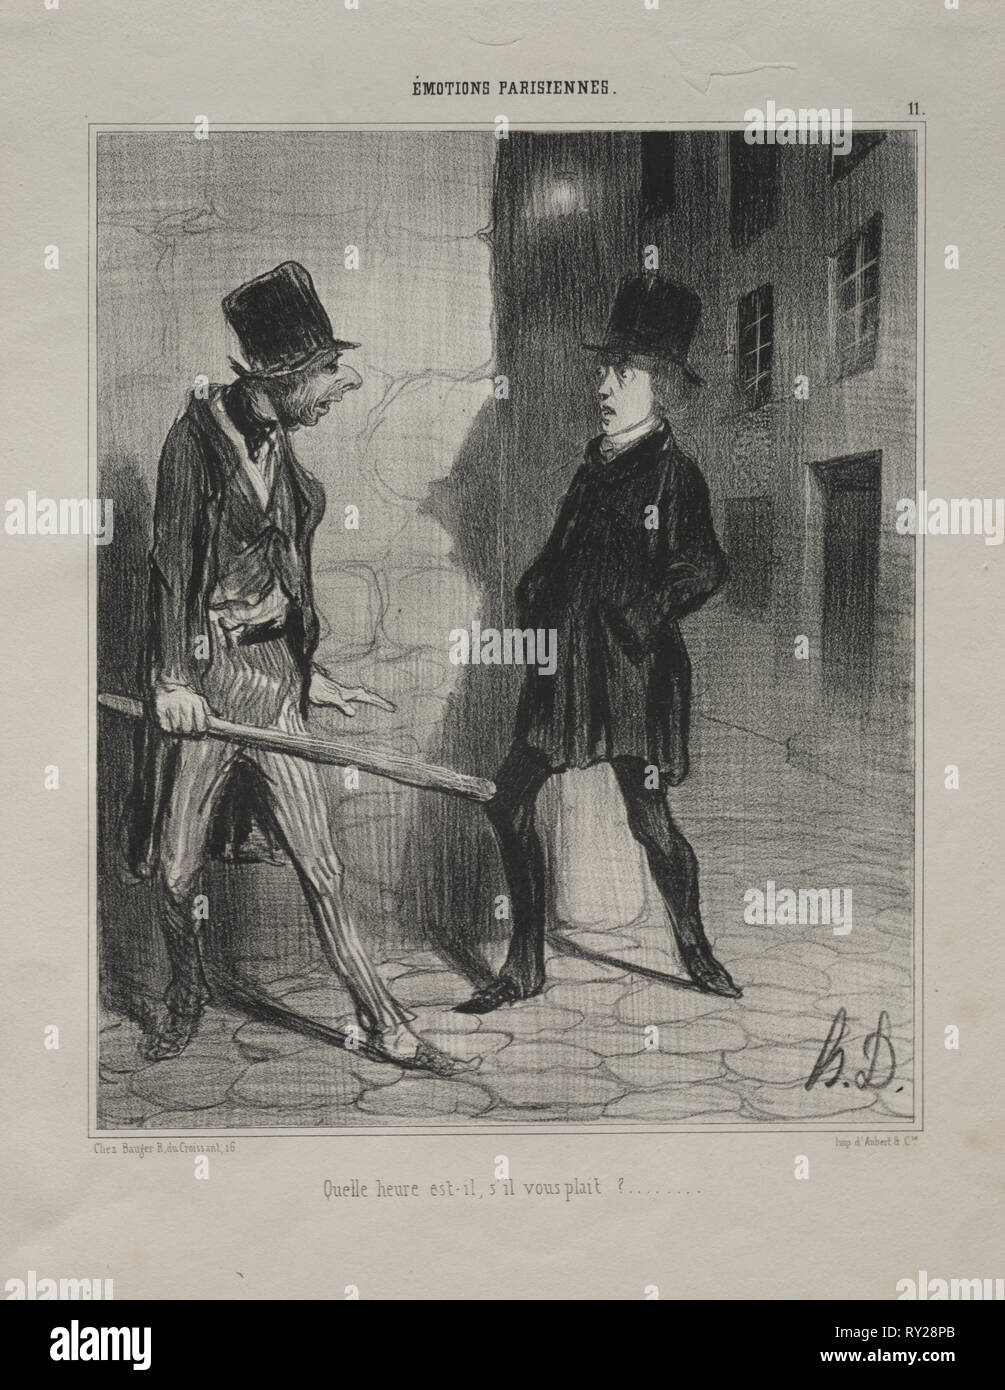 published in le Charivari (no du 24 novembre 1839): Parisian Emotions, plate 11:  What Time is it Please?, 24 November 1839. Honoré Daumier (French, 1808-1879), Aubert. Lithograph; sheet: 34.9 x 25.5 cm (13 3/4 x 10 1/16 in.); image: 24.1 x 19.8 cm (9 1/2 x 7 13/16 in Stock Photo